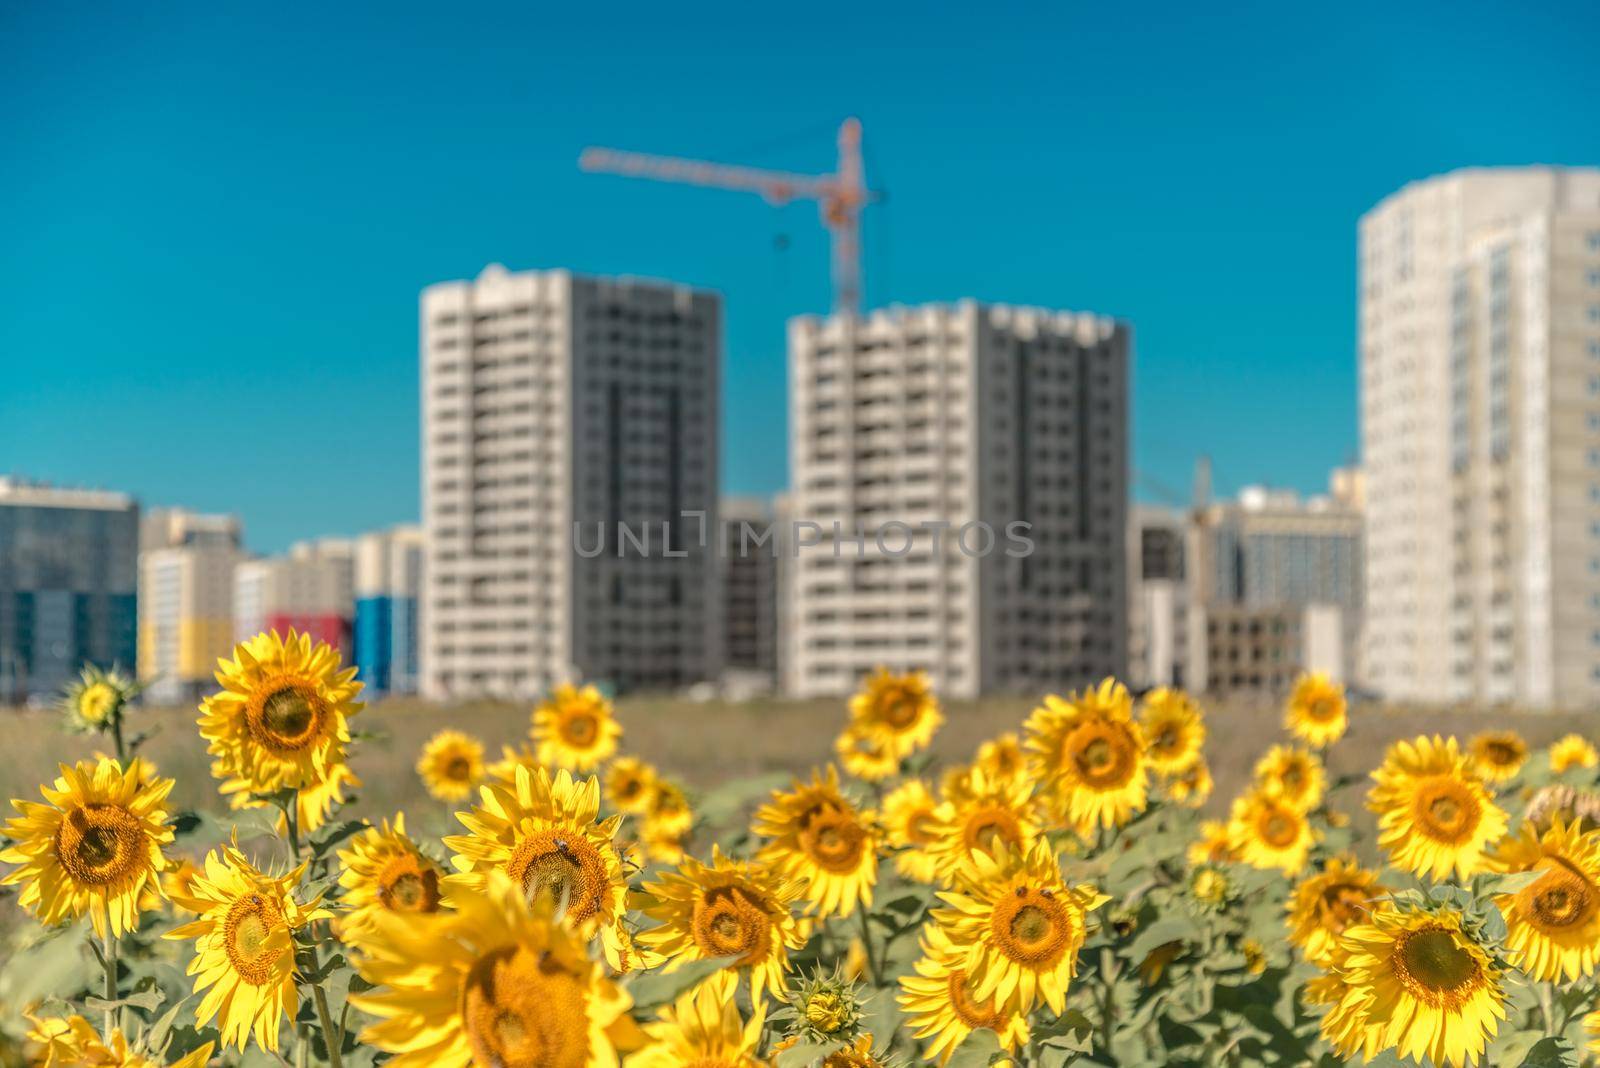 Field of large sunflowers near the new buildings on blue sky background by Proff